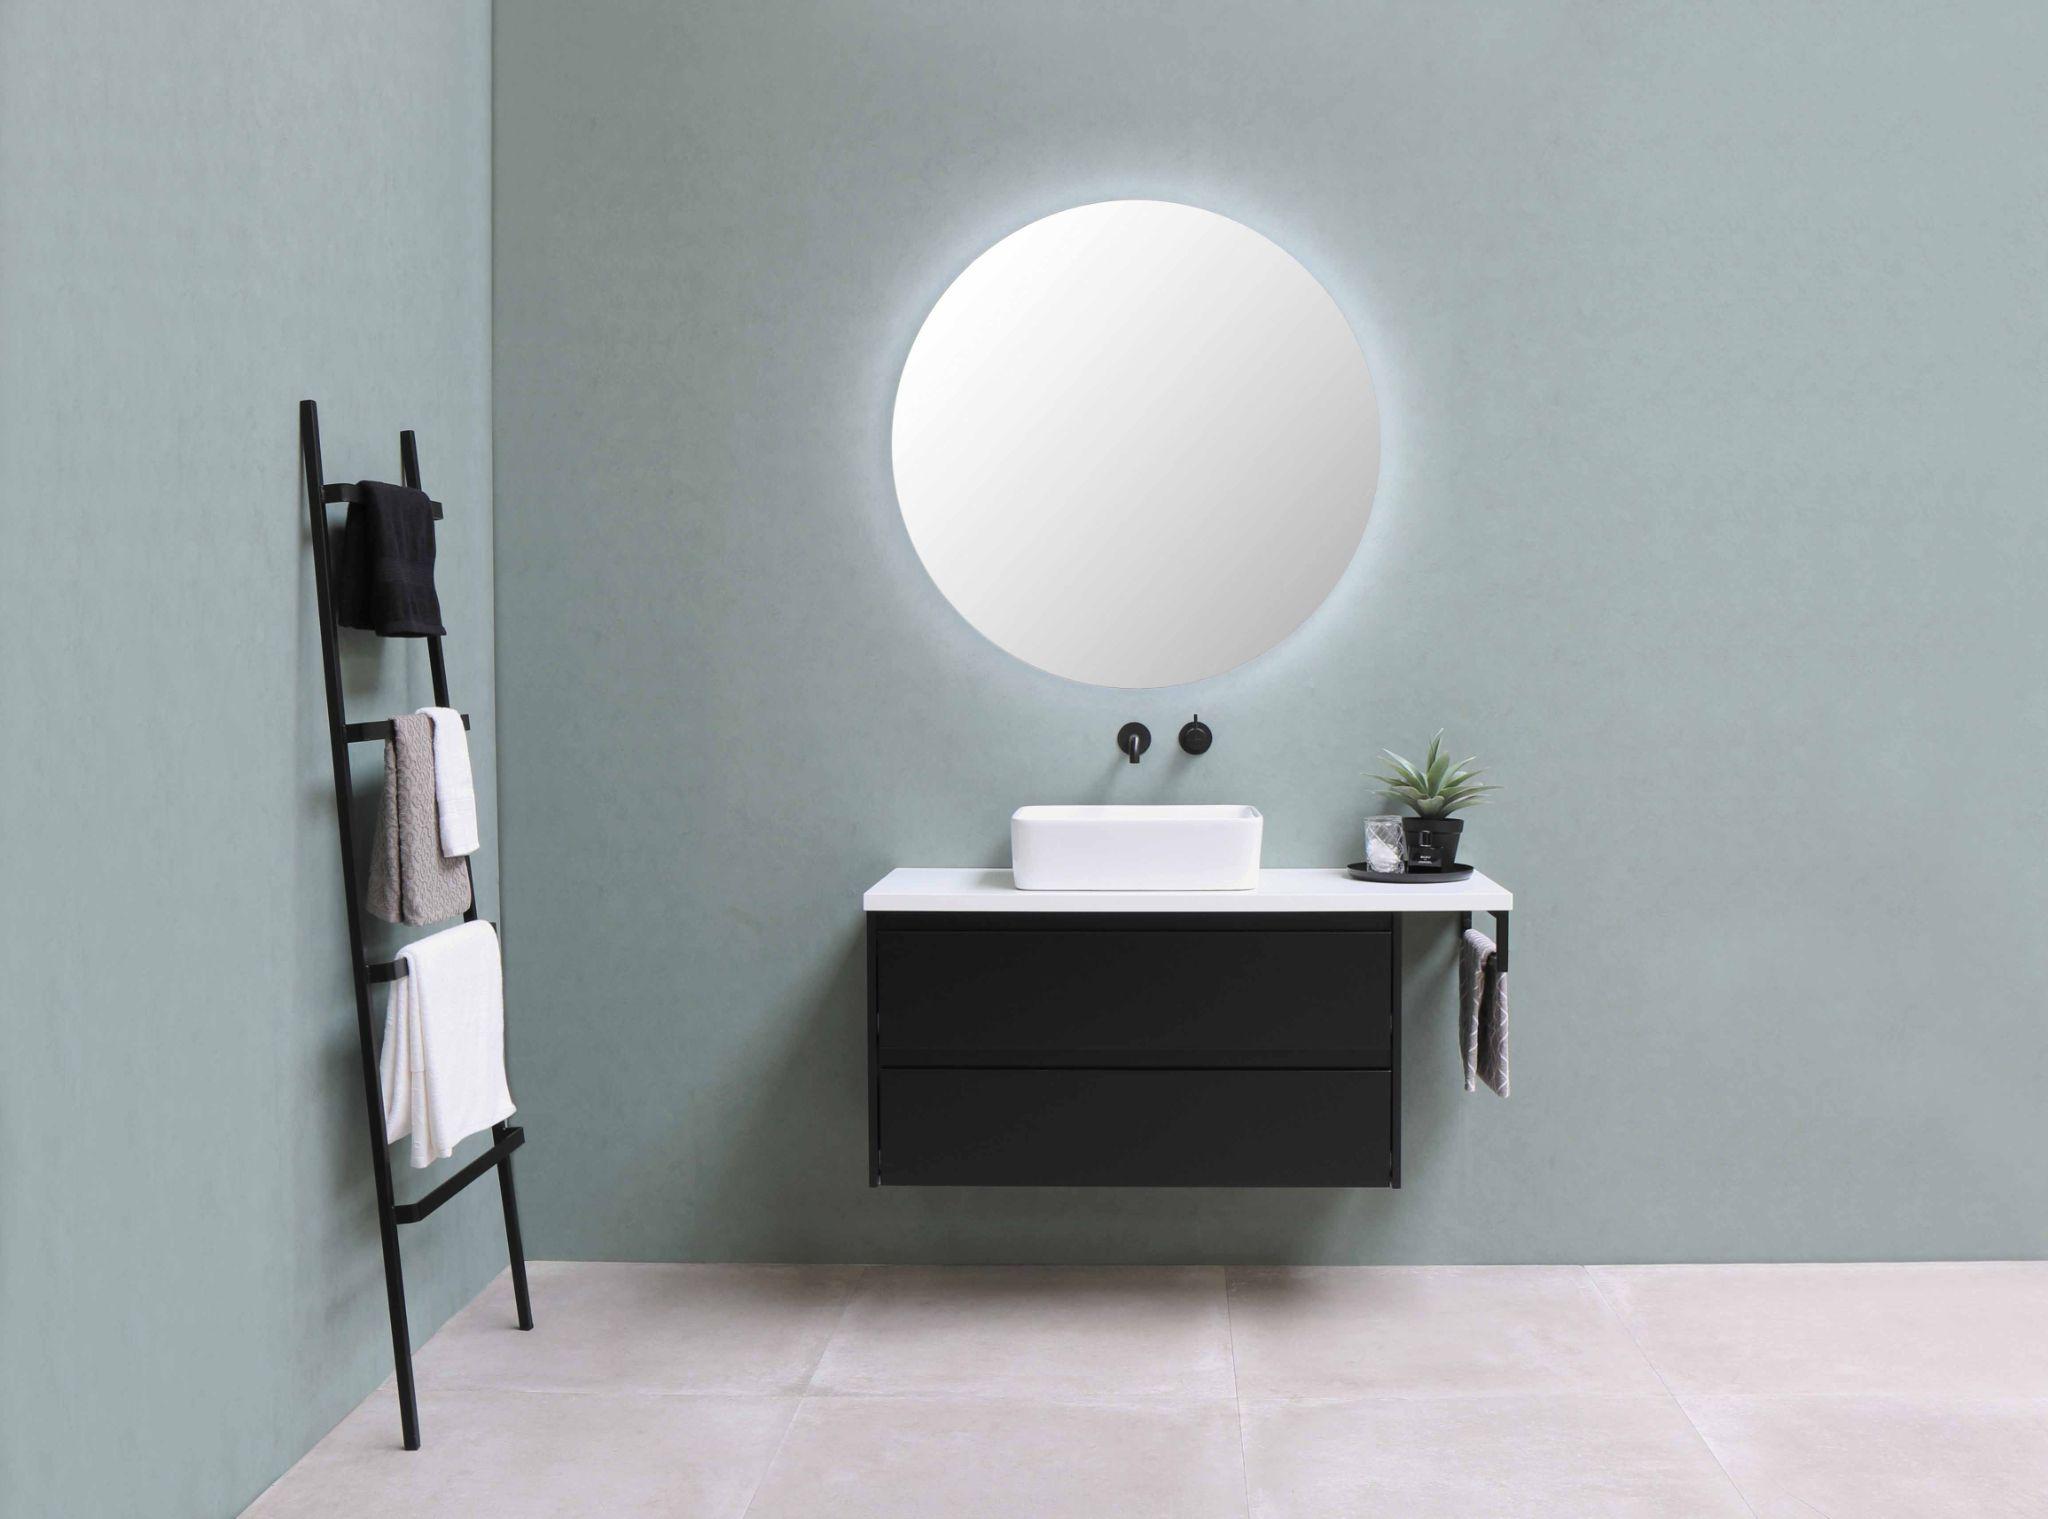 Bright bathroom ideas – turn a simple room into an elegant and relaxing space using light and colour, 8, eurocraftswfl.com